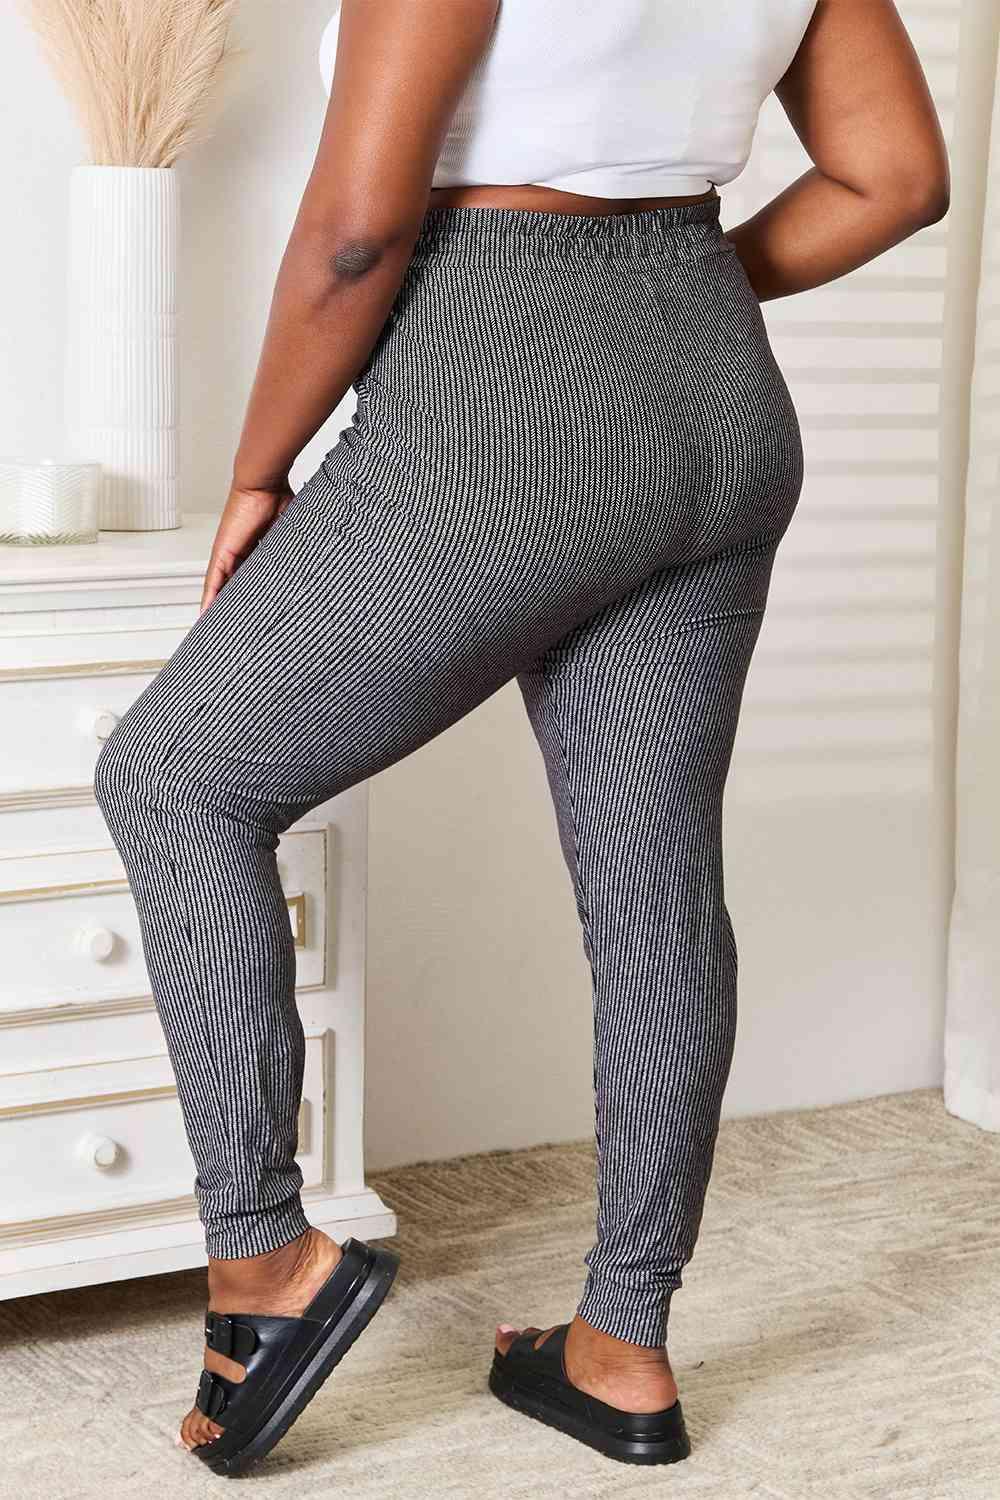 Unhindered Plus Size Womens Striped Joggers - MXSTUDIO.COM